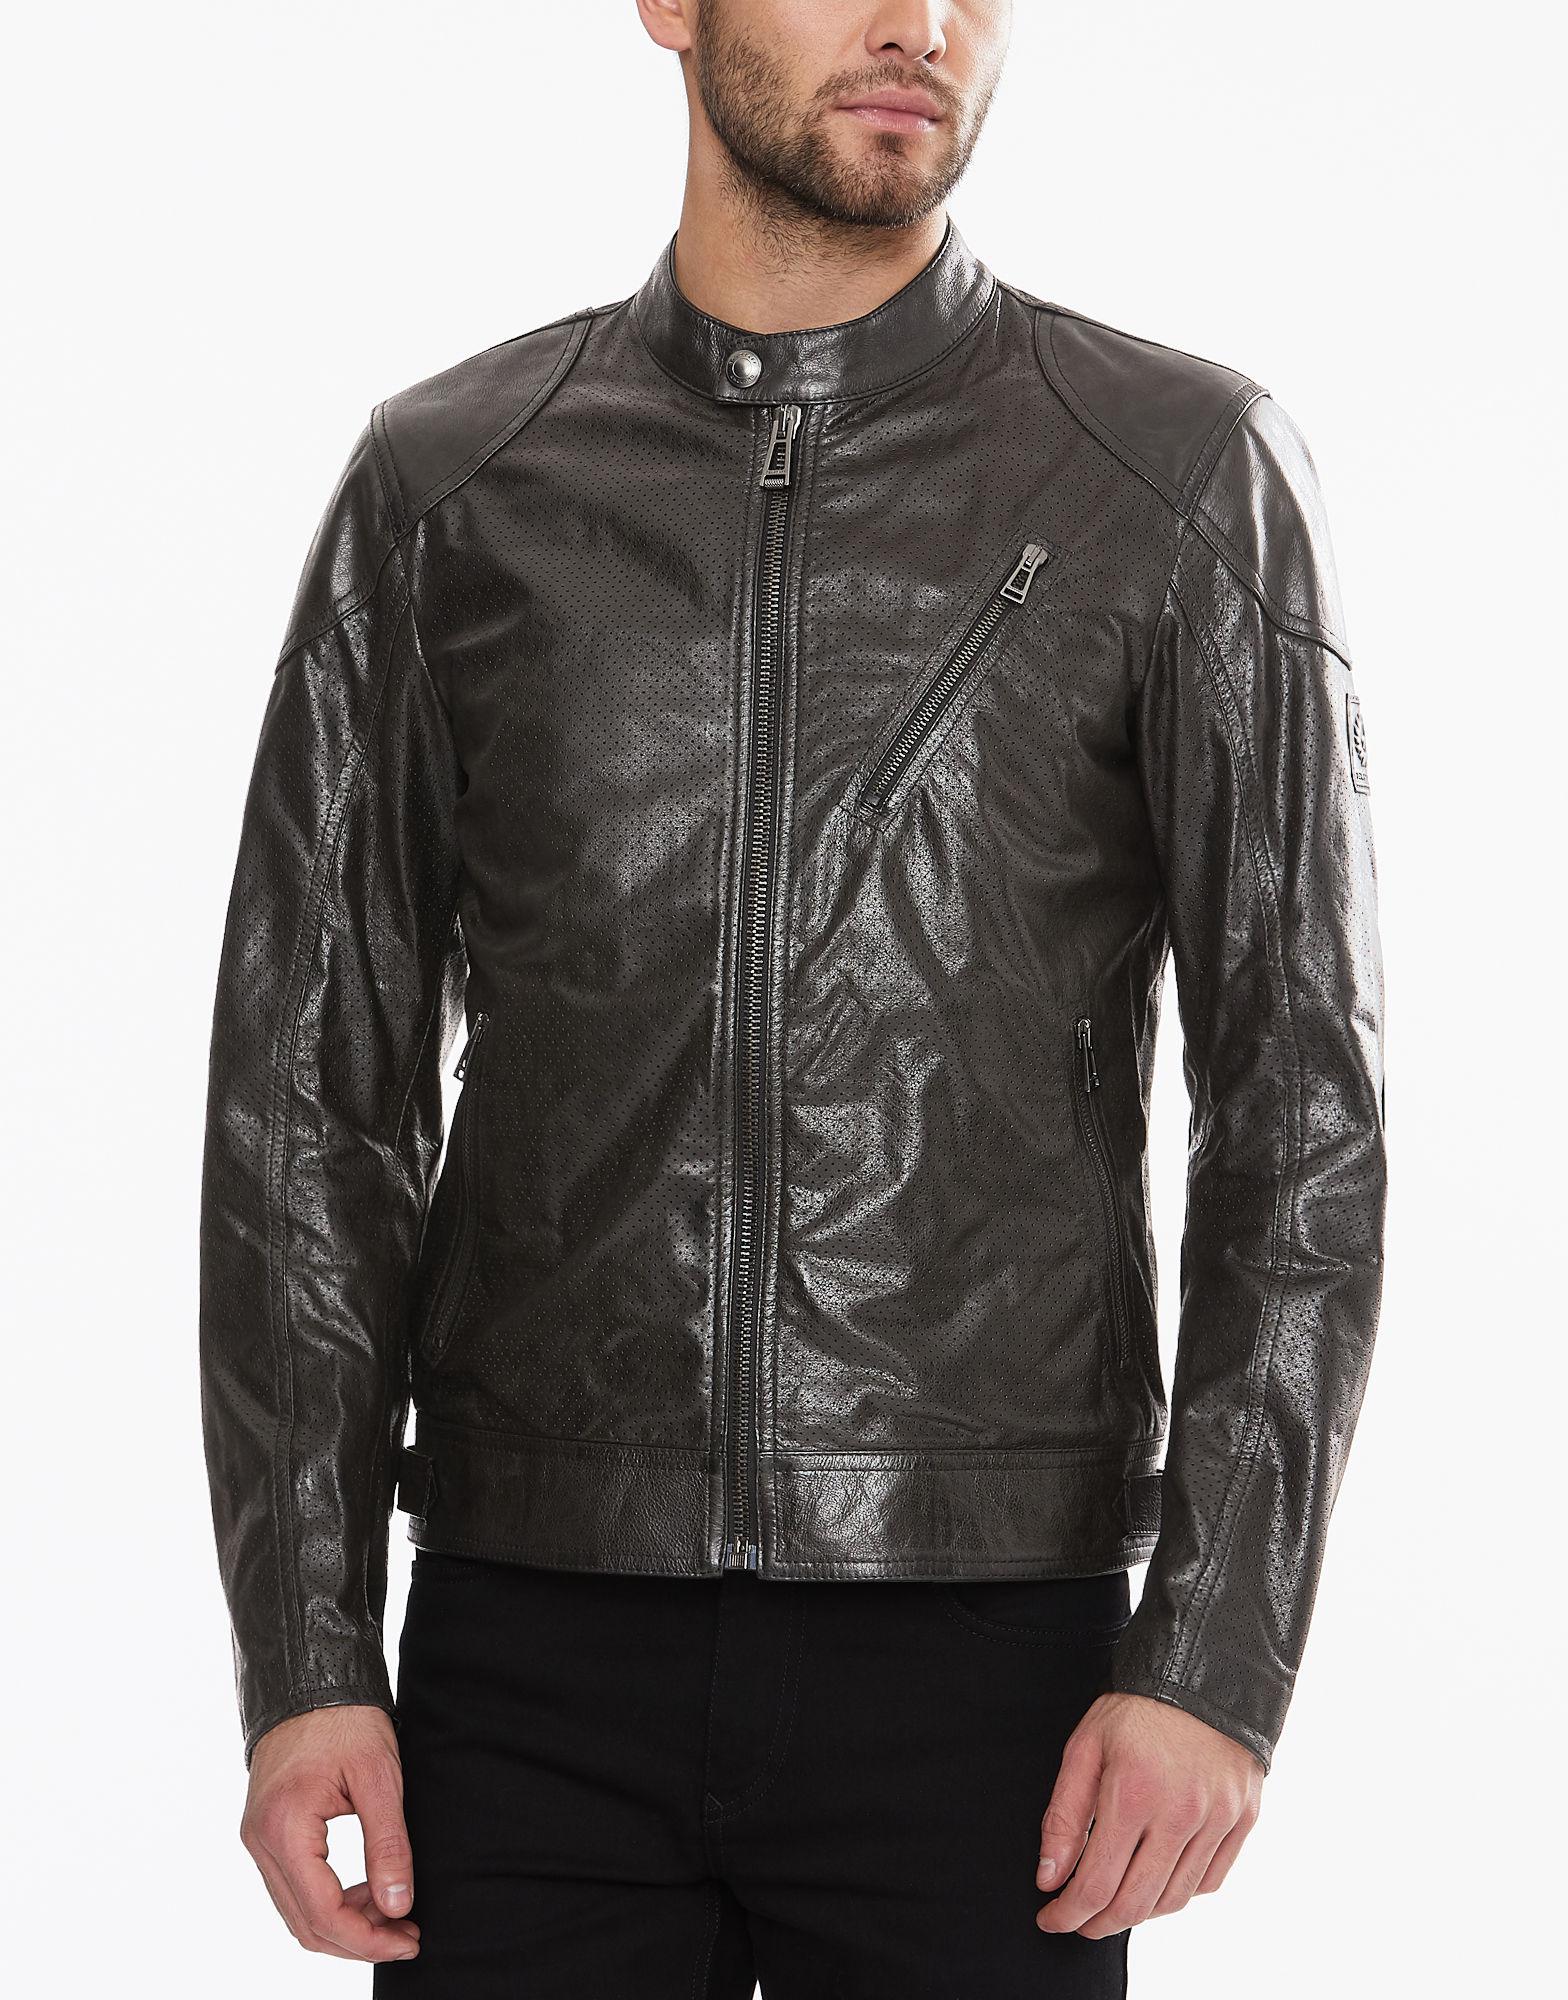 Belstaff Leather Maxford Perforated Jacket in Black for Men - Lyst